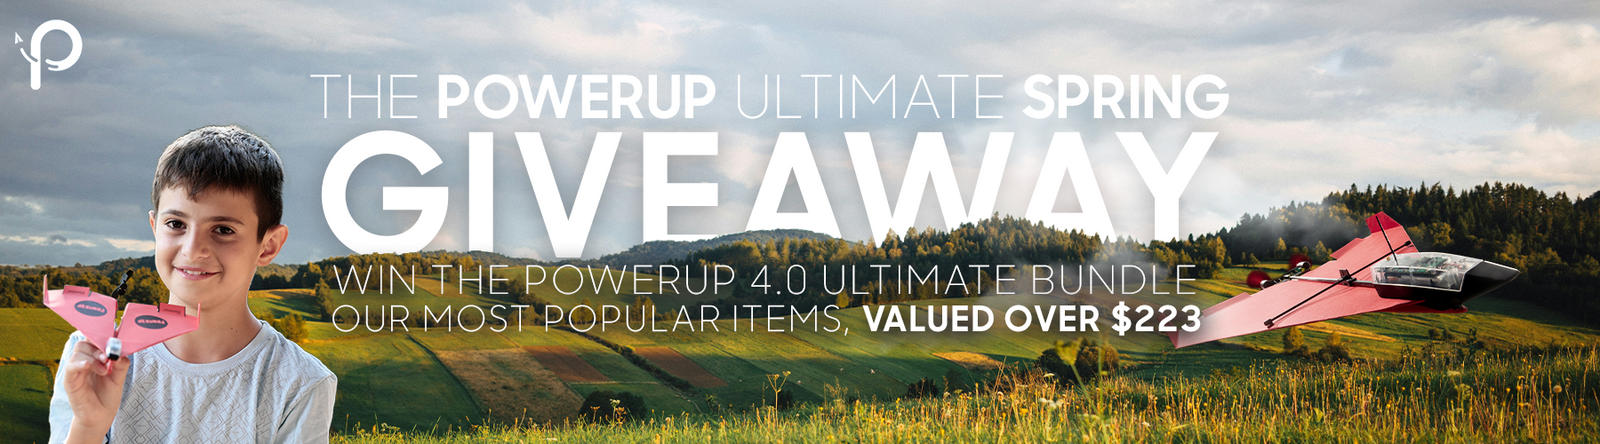 POWERUP ULTIMATE SPRING GIVEAWAY